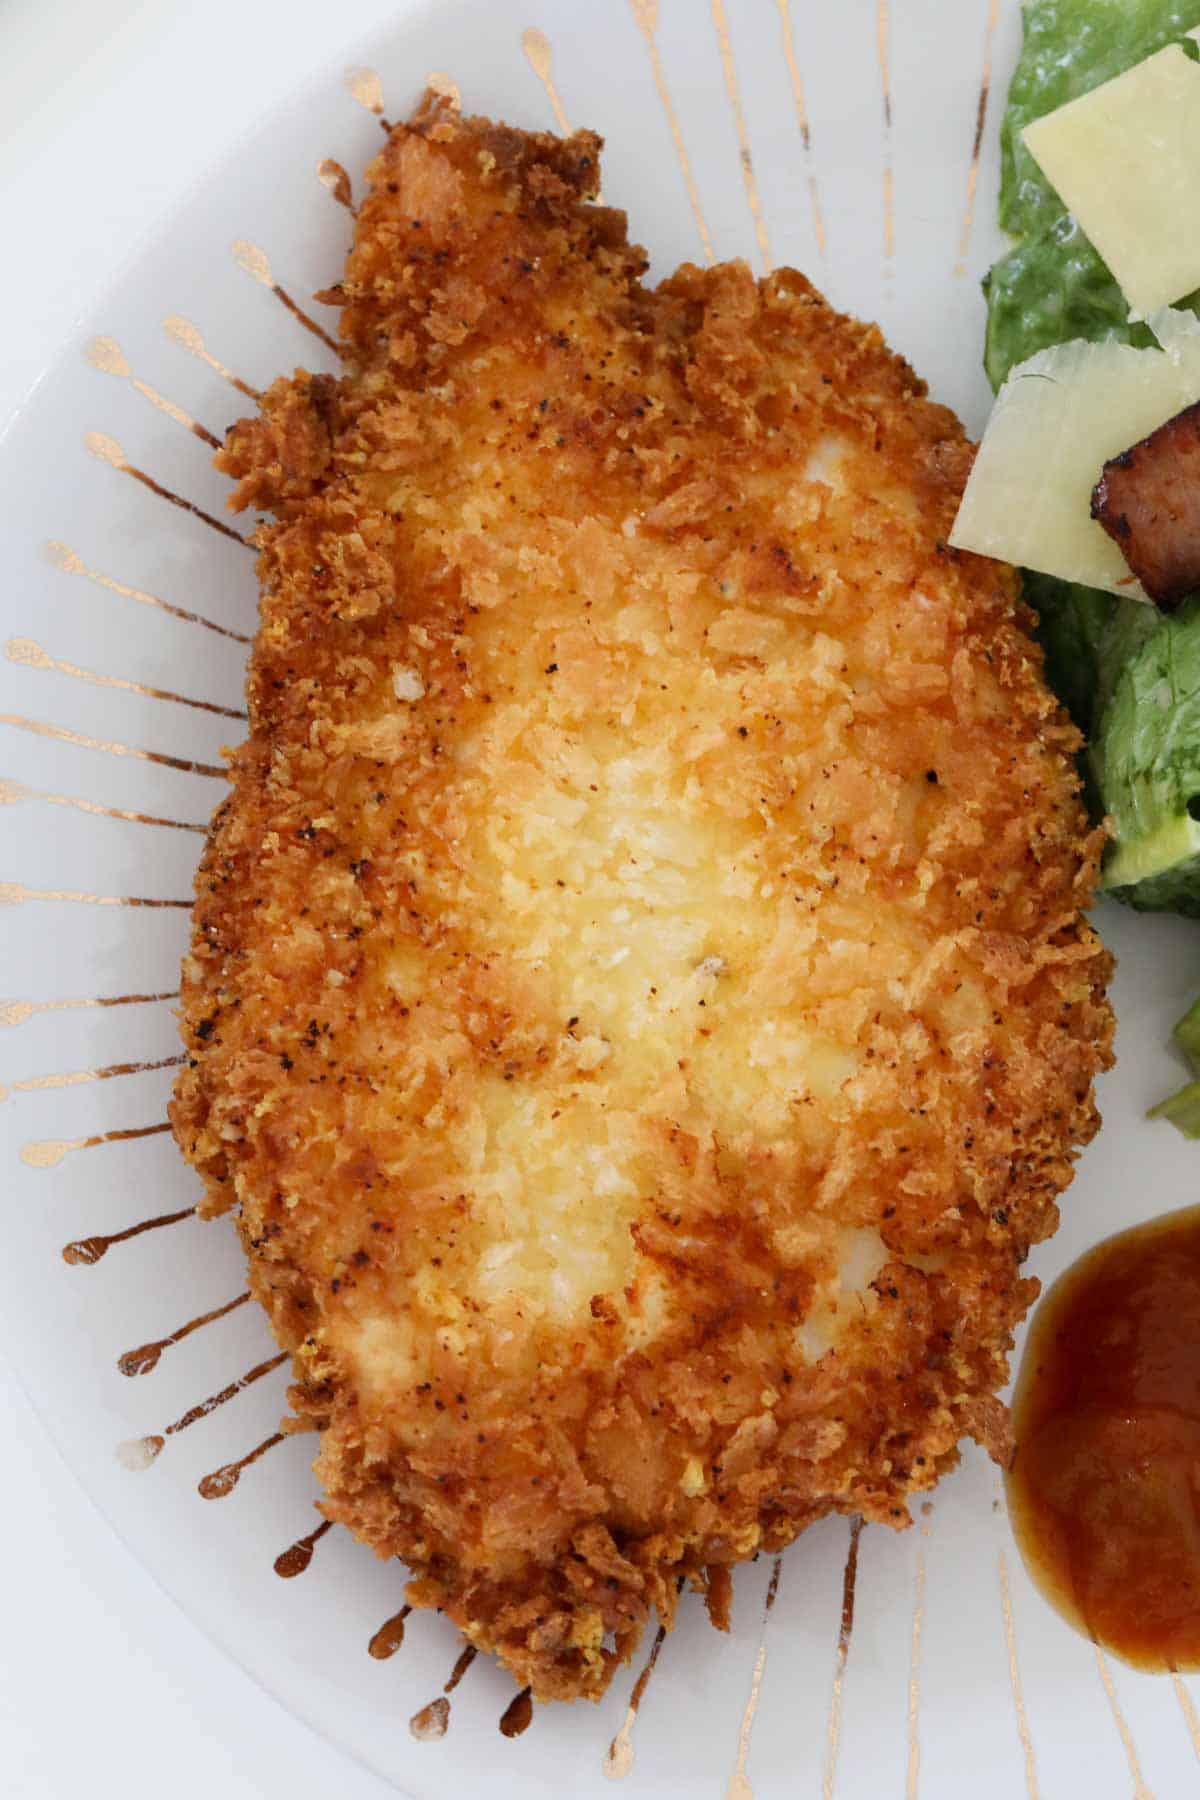 Crispy crumbed chicken fillets served with a salad.